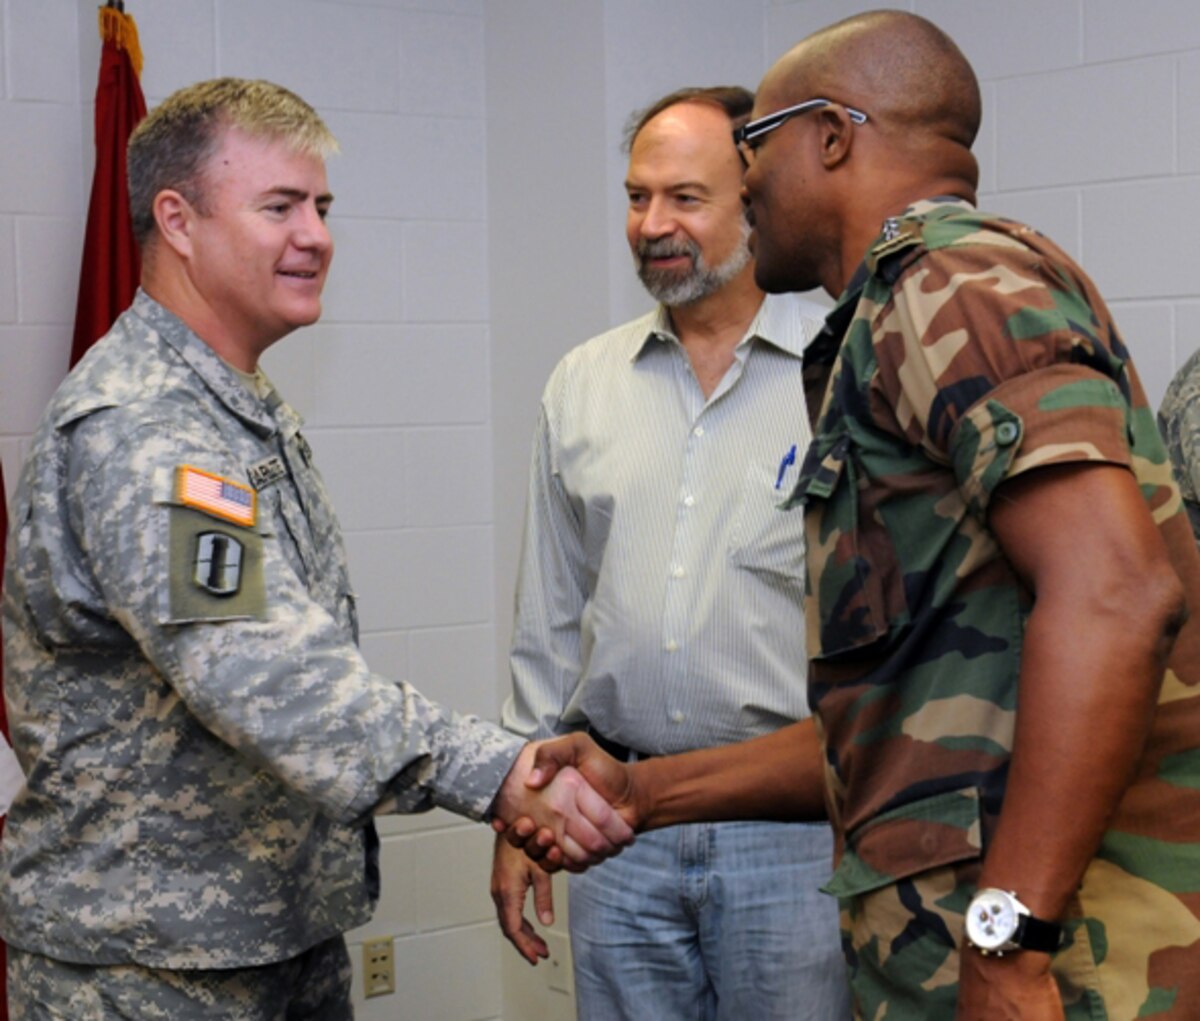 RAPID CITY, S.D. - Brig. Gen. Jeff Marlette (left), assistant adjutant general of the South Dakota Army National Guard, welcomes Col. Hedwig Gilaard, Suriname Chief of Armed Forces, to Camp Rapid in Rapid City, S.D., as U.S. Ambassador to Suriname Mr. John Nay looks on Wednesday, June 15, 2011. The dignitaries were shown various military training associated with the annual Golden Coyote training exercise, which brought 2,100 National Guard Soldiers and Airmen from across the U.S. to the Black Hills for the two-week training event. (SDNG photo by OC Chad Carlson) (RELEASED)